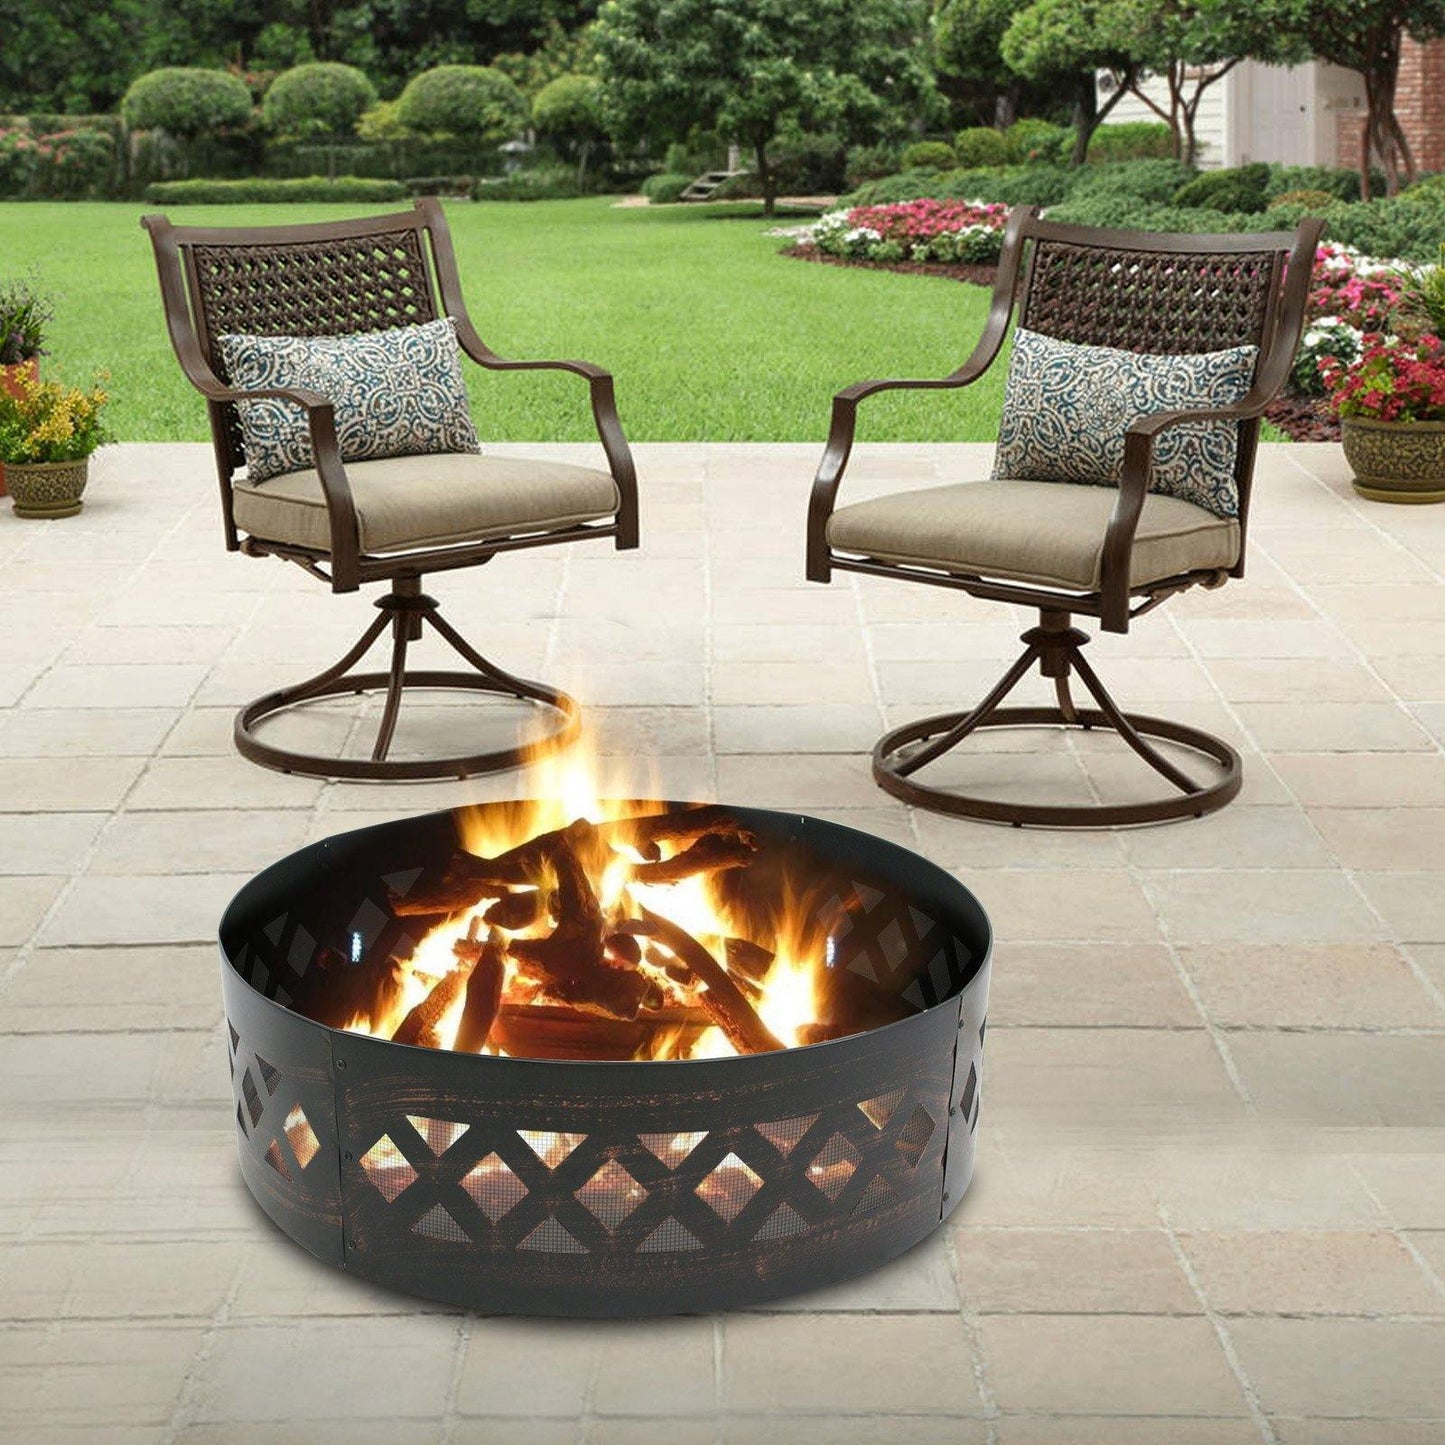 12 Deals on Fire Pits That Are Easy to Set Up and Use